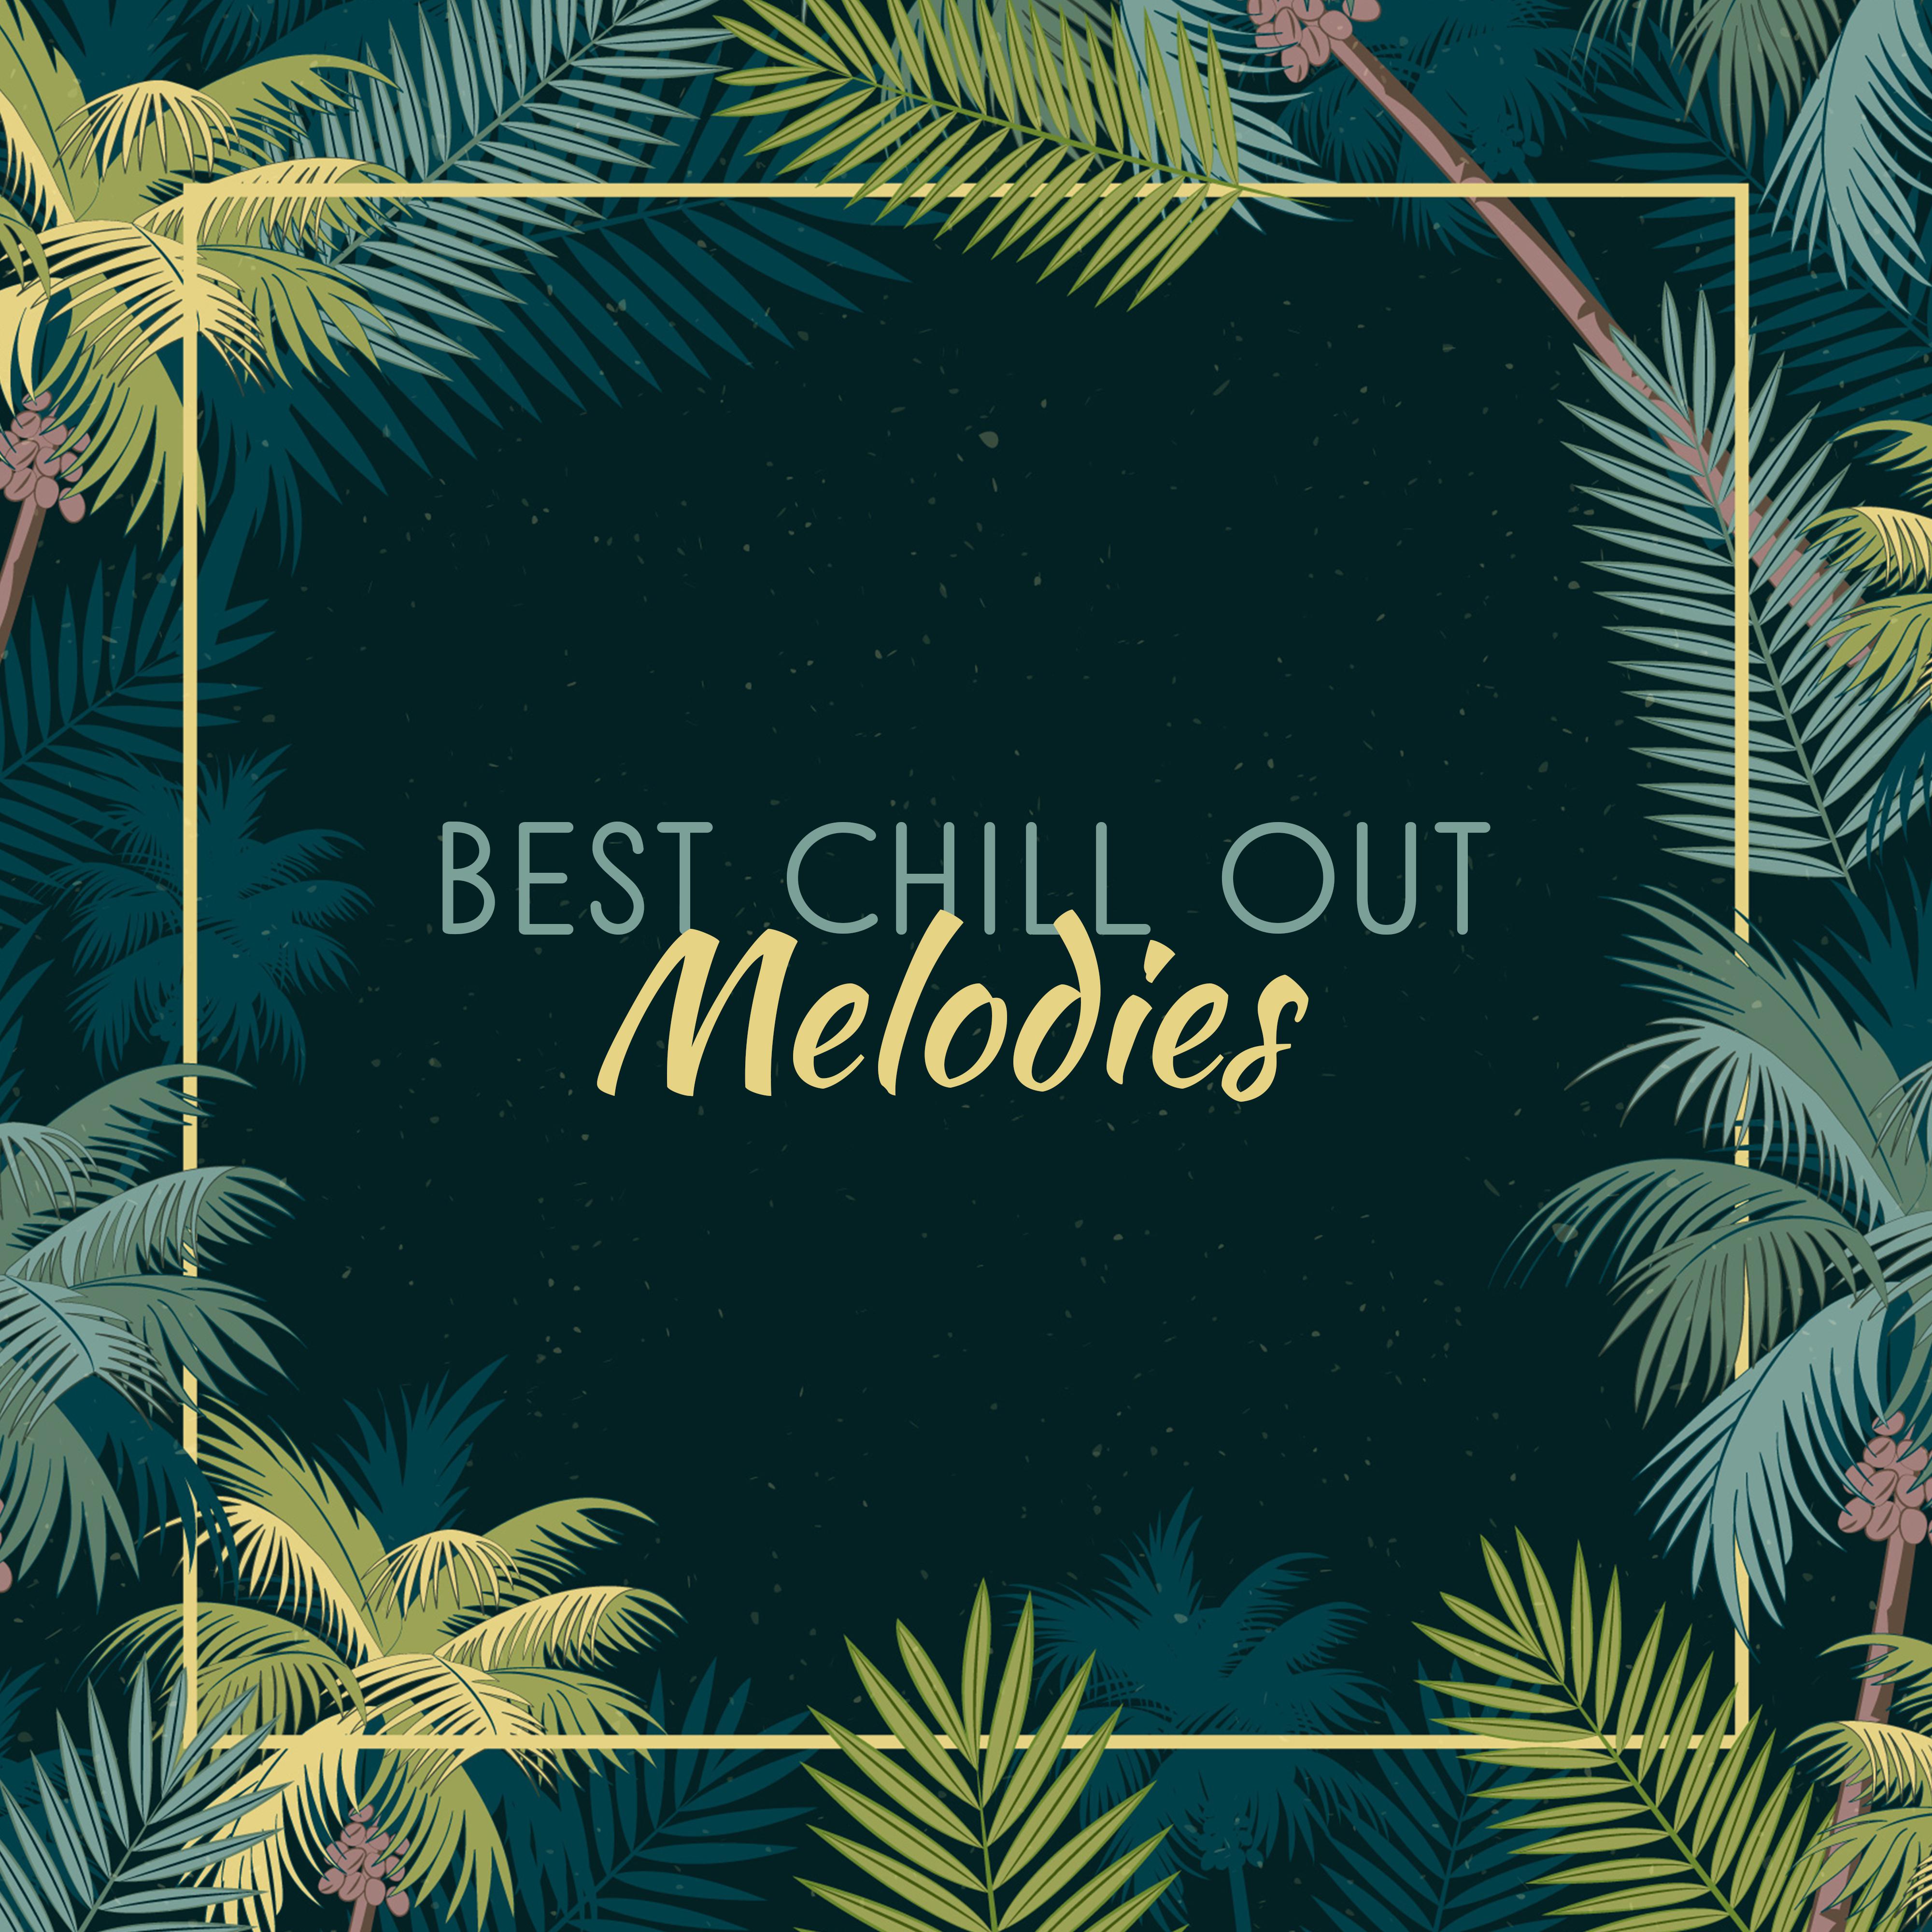 Best Chill Out Melodies